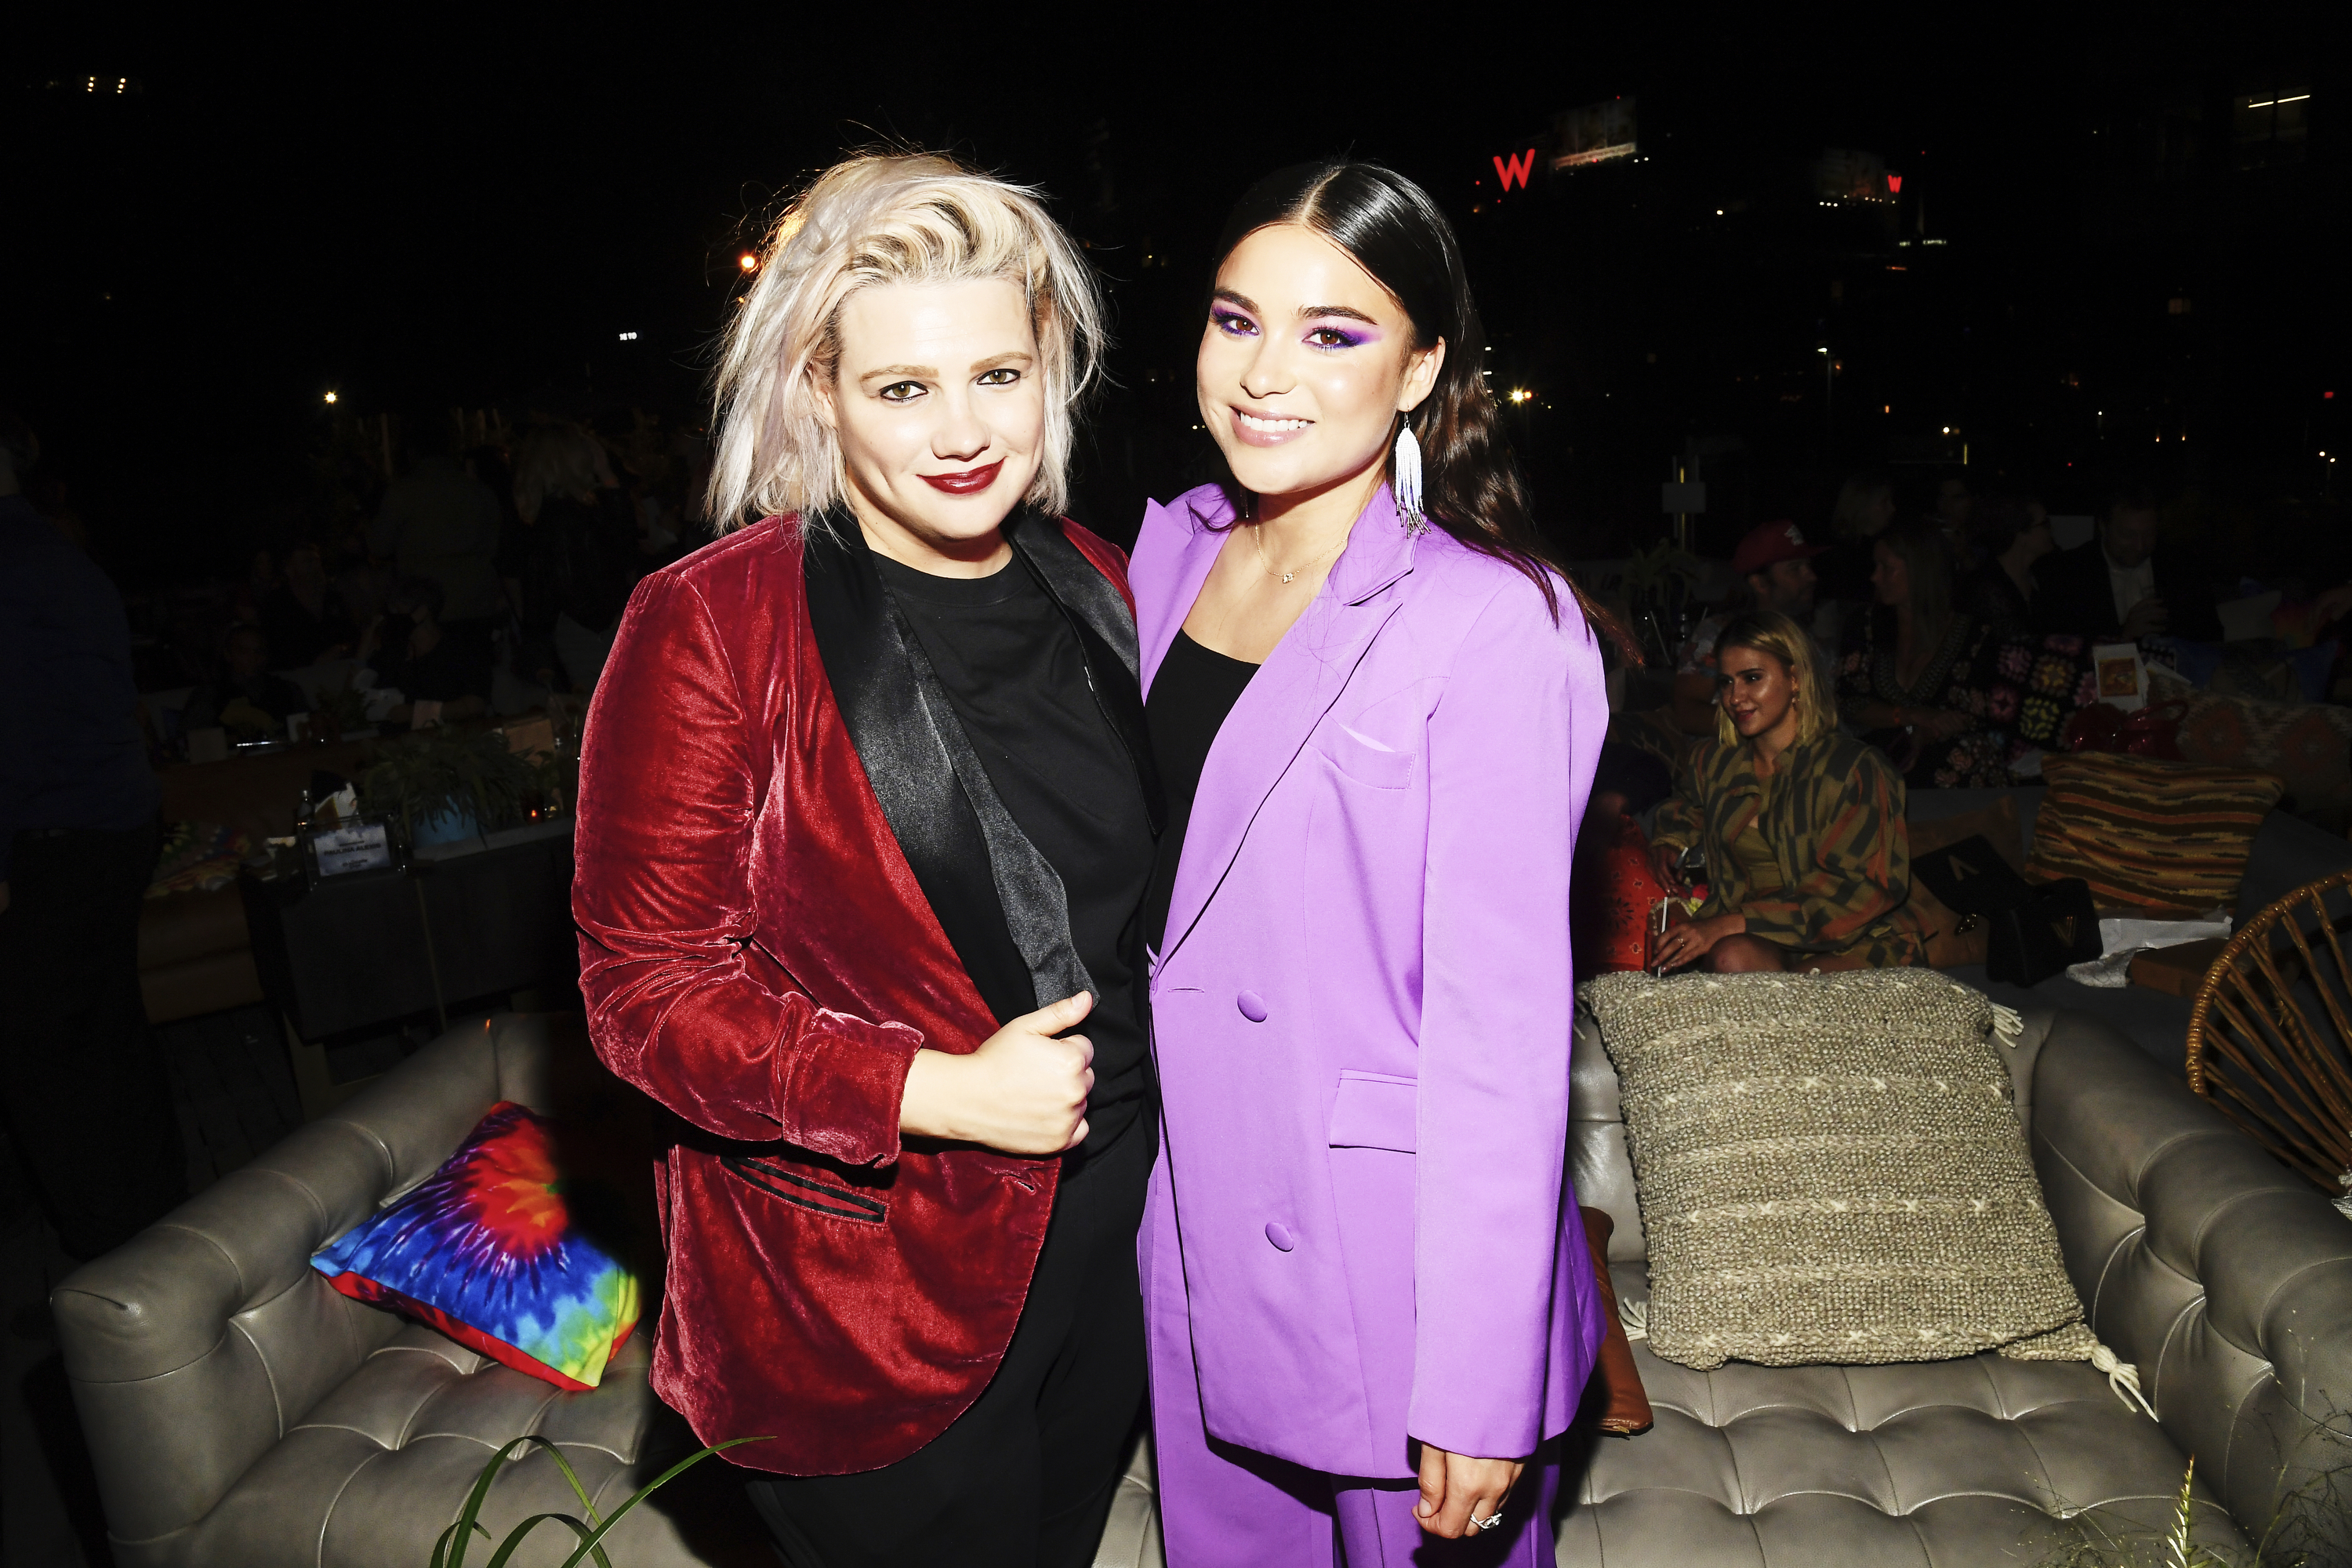 D. W. Waterson and Devery Jacobs at the after party for the premiere of FX’s "Reservation Dogs" on August 5, 2021, in Los Angeles, California. | Source: Getty Images